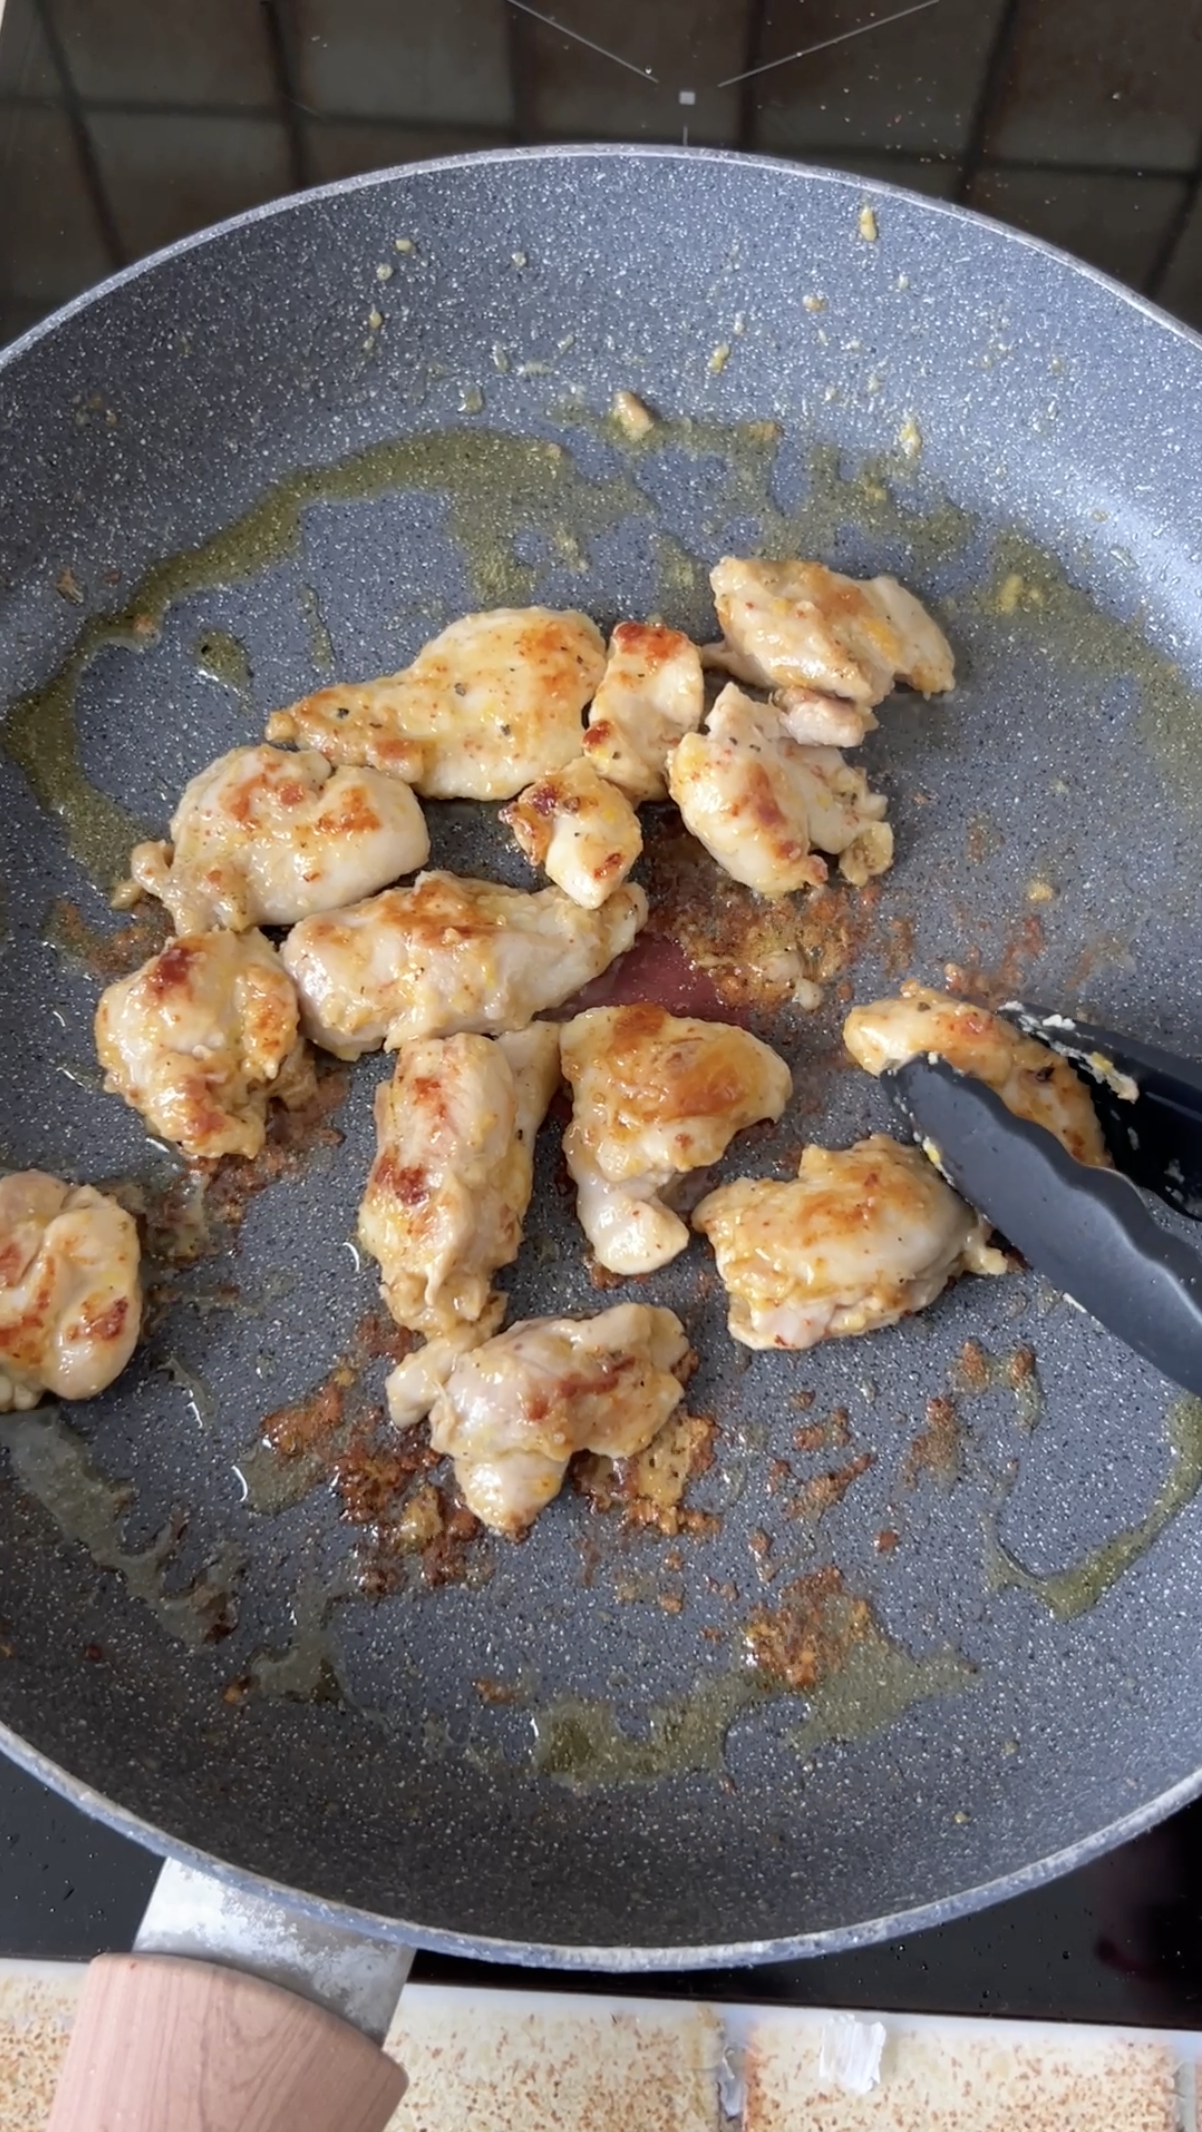 Golden chicken pieces, removed from the pan with black tongs.